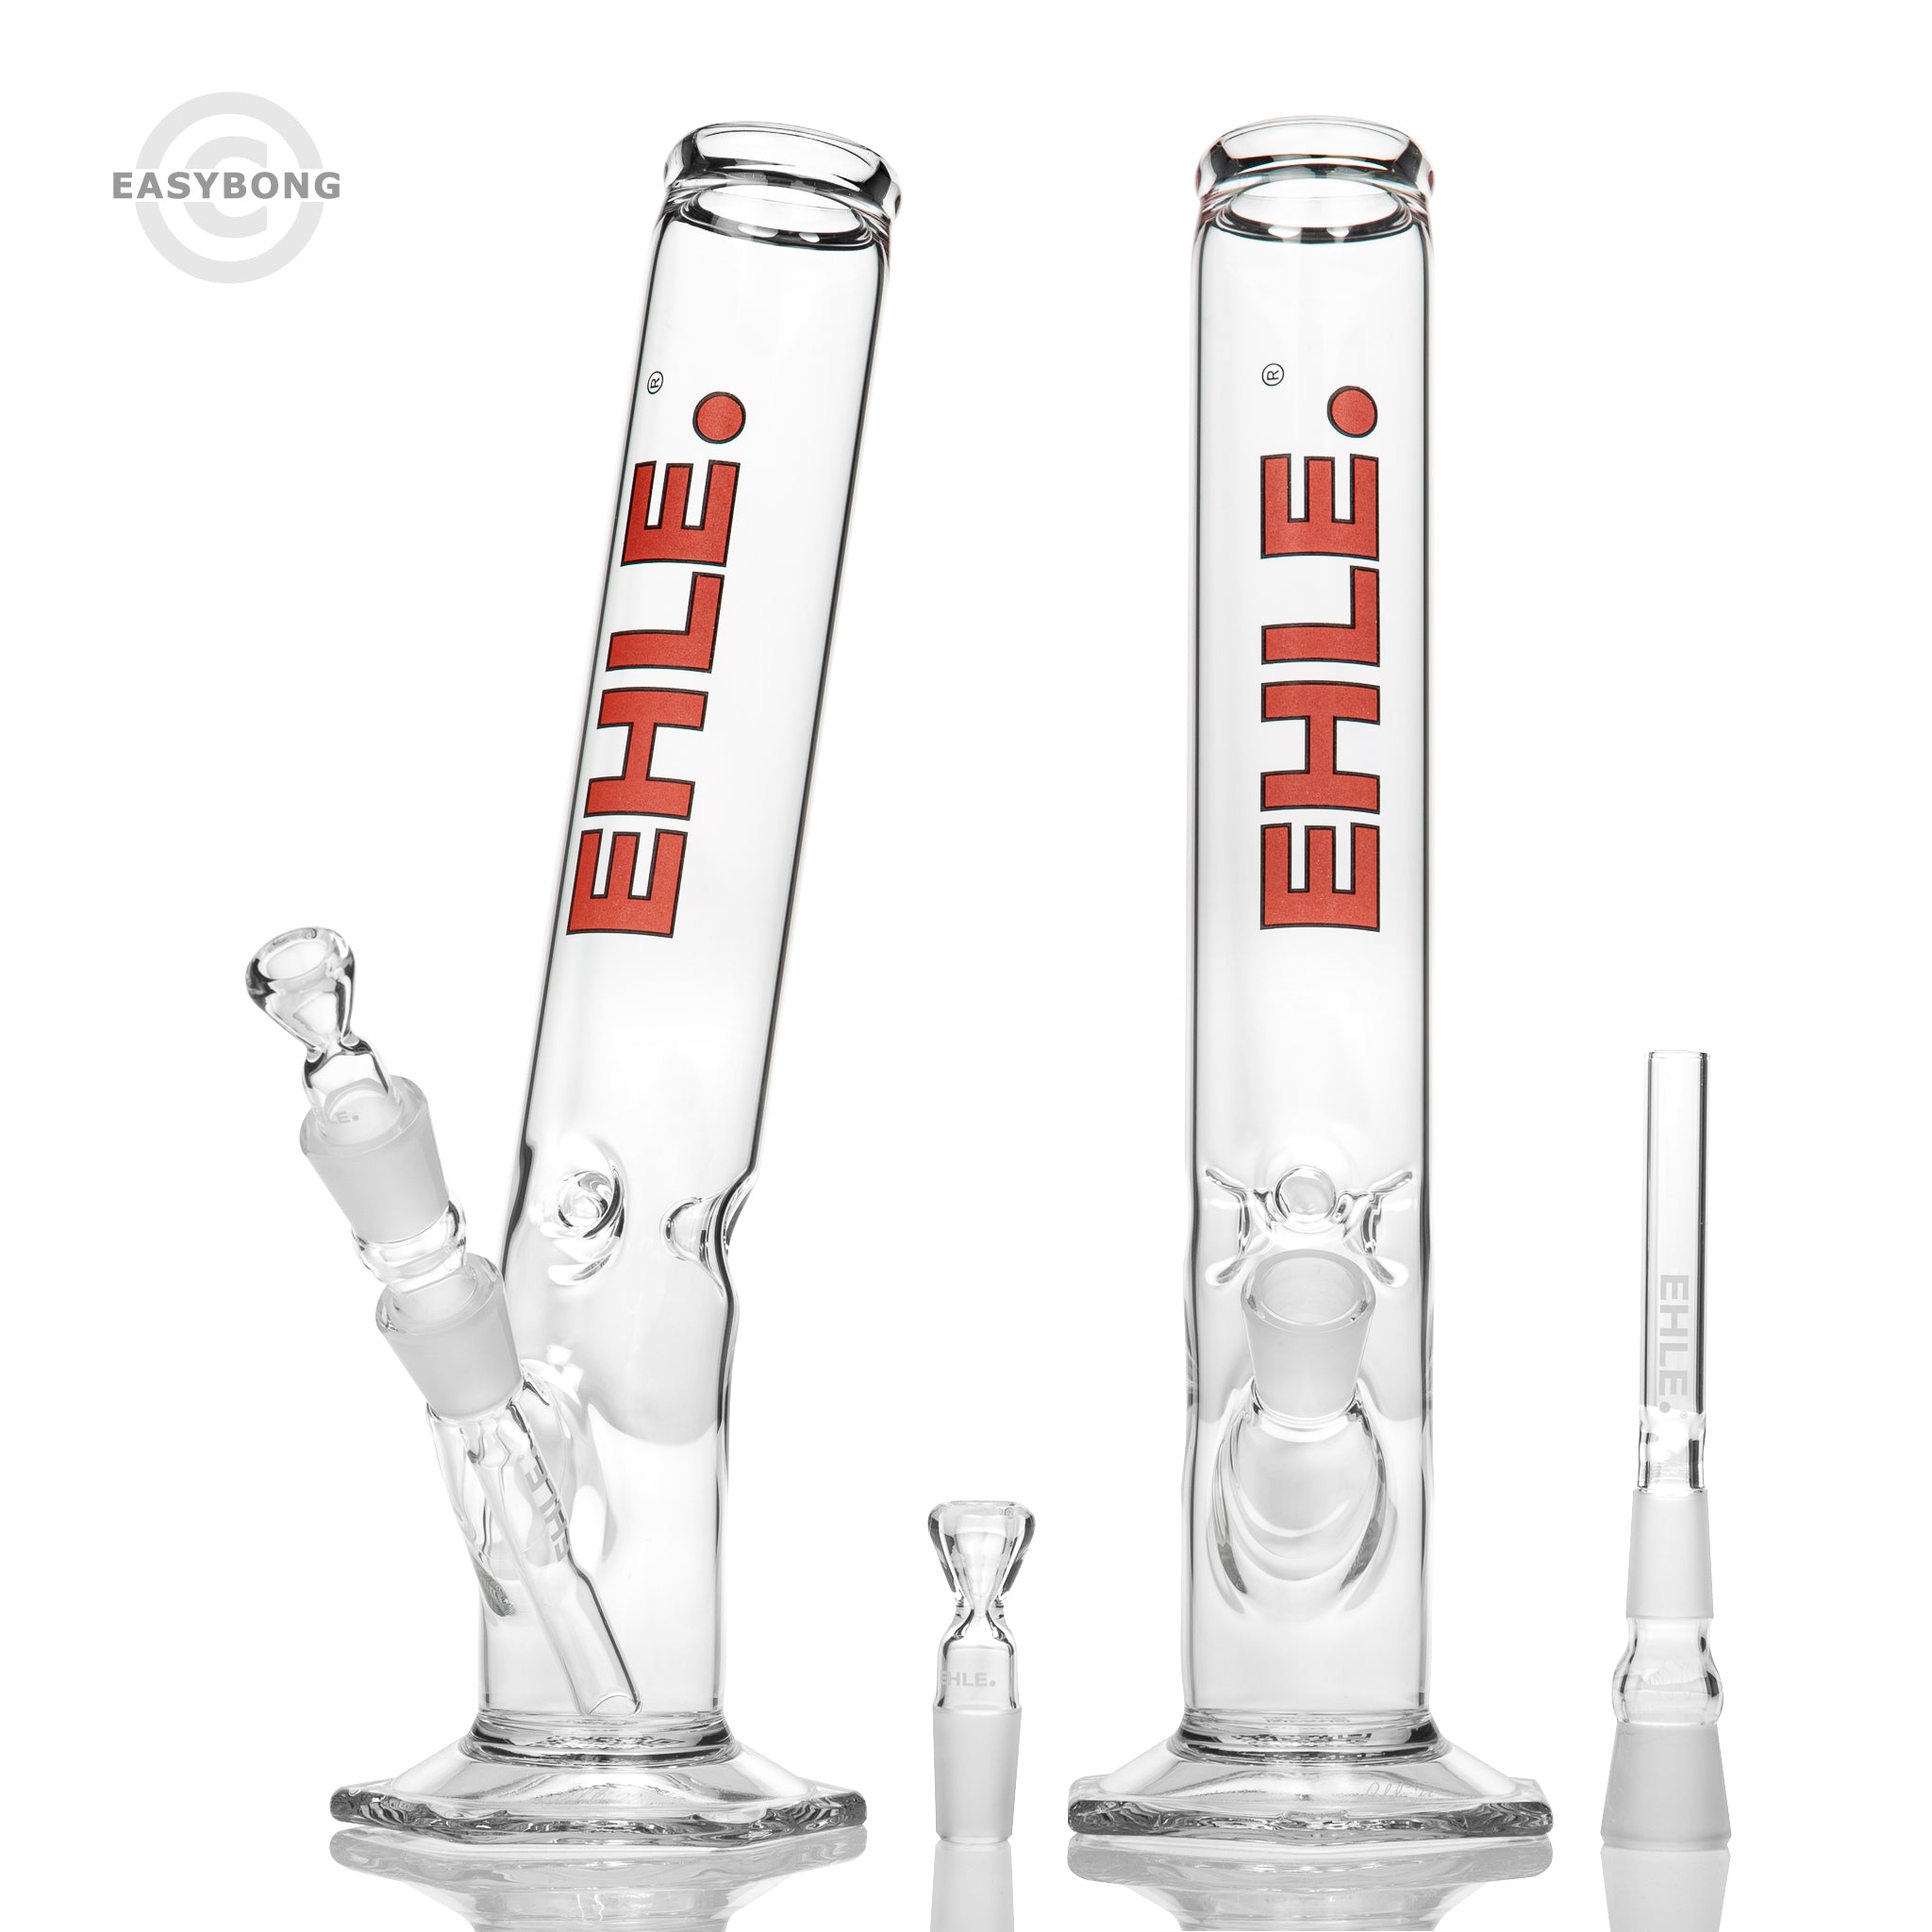 EHLE Glass bongs in Perth.